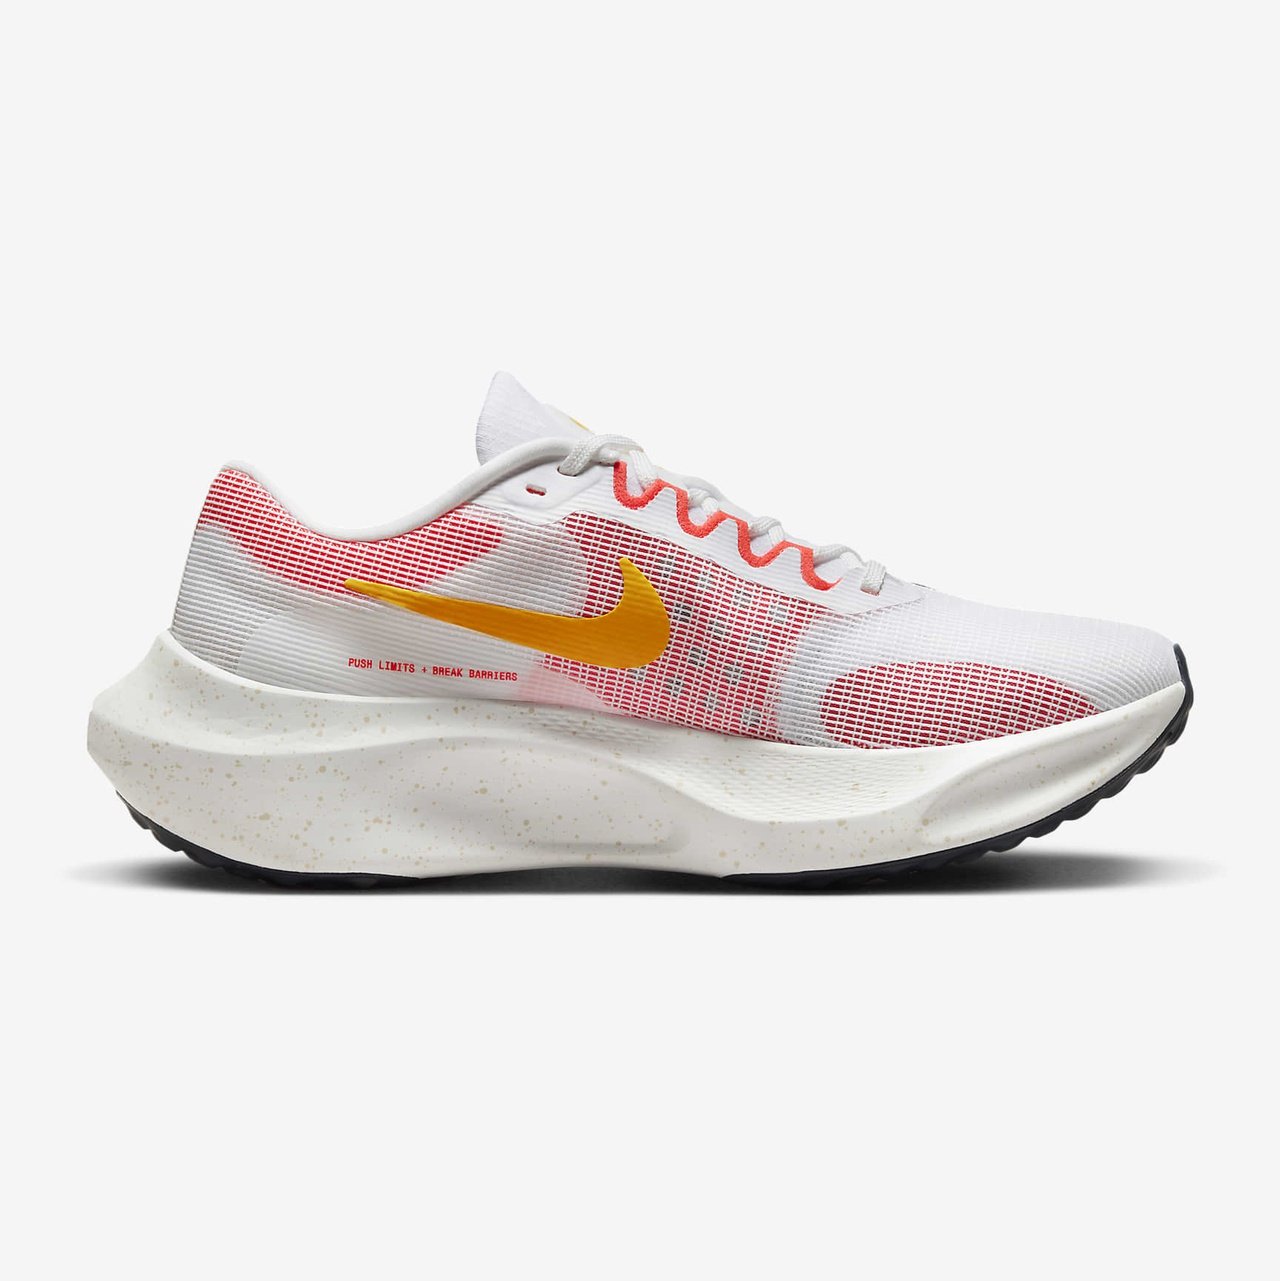 Nike Zoom Fly 5 Mens FOOTWEAR - Mens Carbon Plate WHITE/OBSIDIAN/BRIGHT CRIMSON